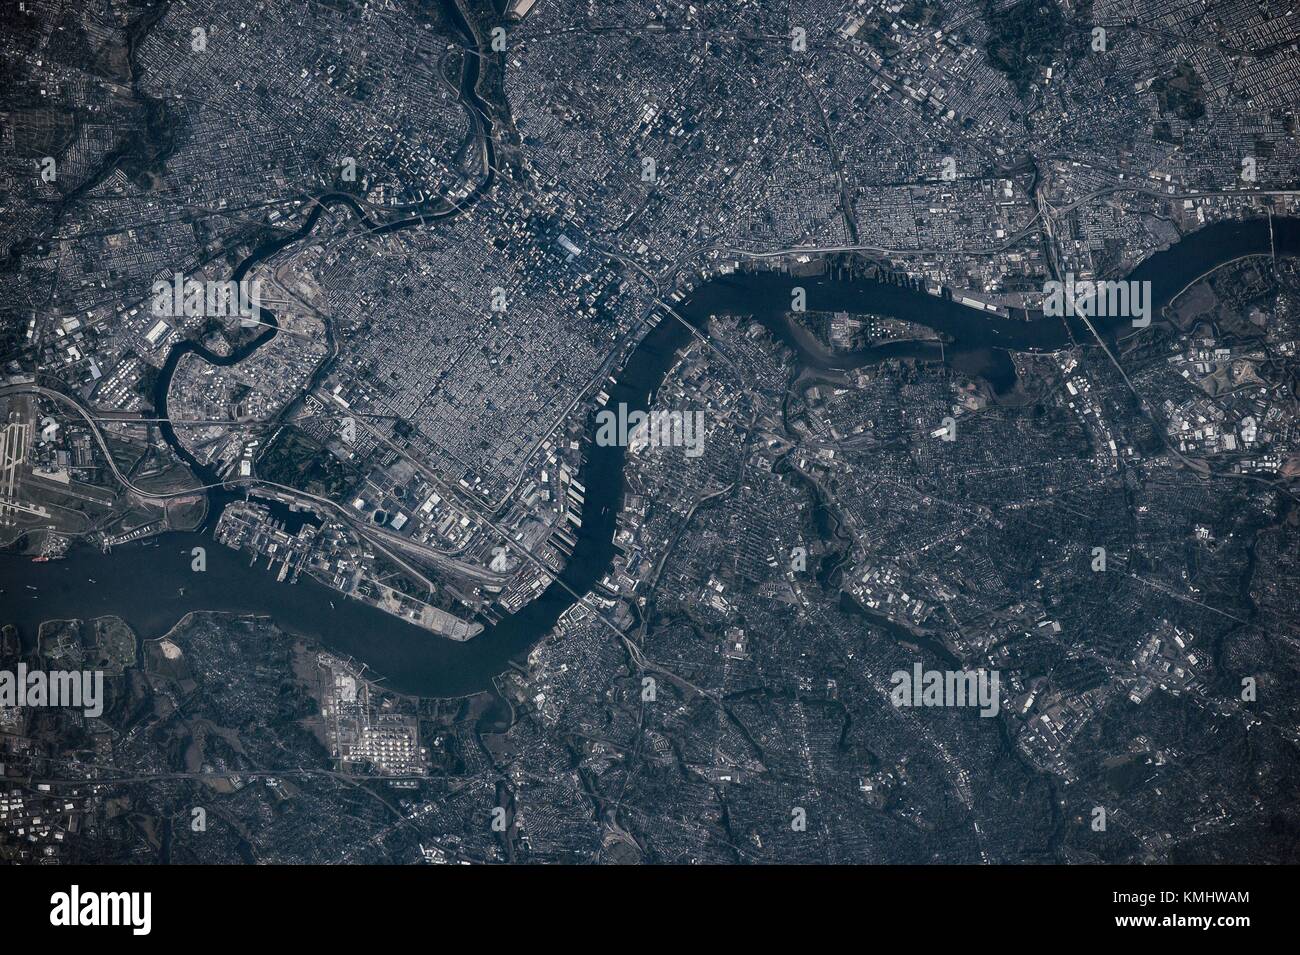 Daytime view from the International Space Station of Philadelphia Pennsylvania as seen from Earth Orbit. Stock Photo